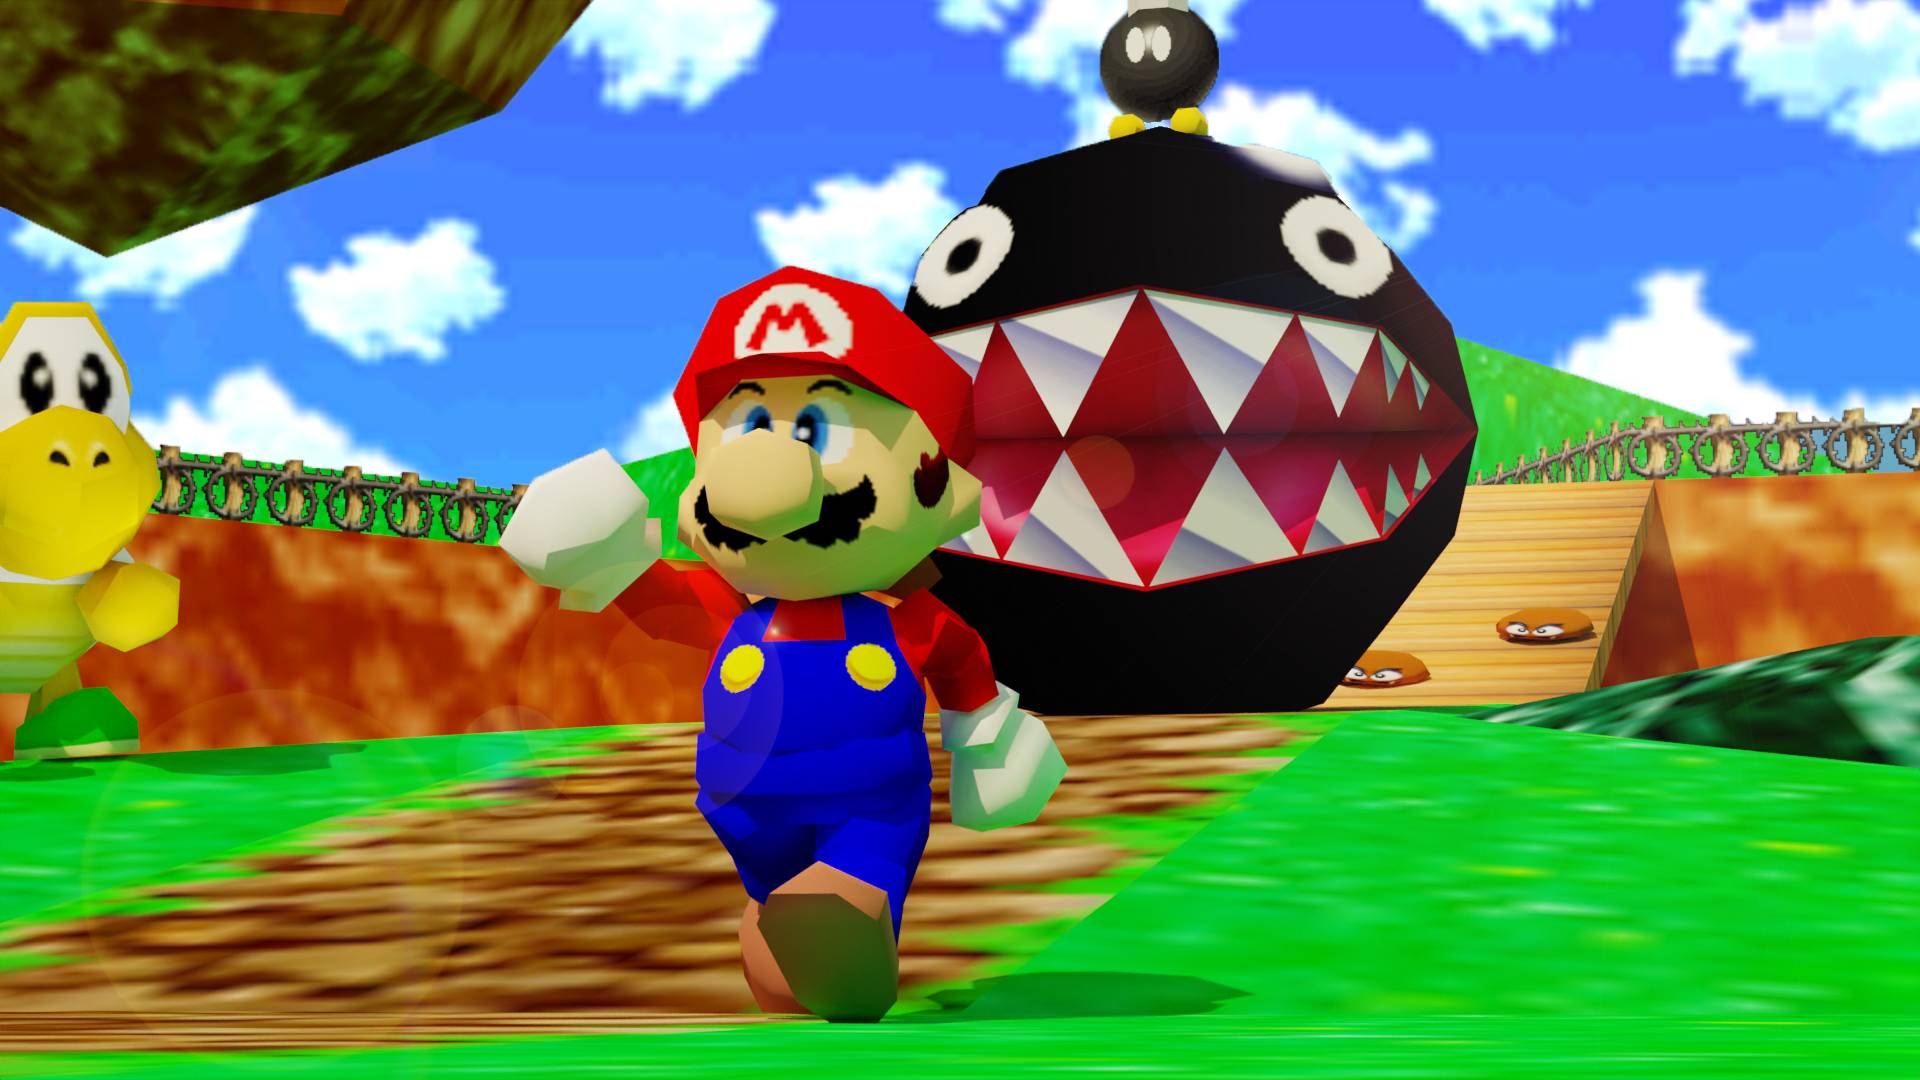 Super Mario 64 Ds wallpapers for desktop download free Super Mario 64 Ds  pictures and backgrounds for PC  moborg